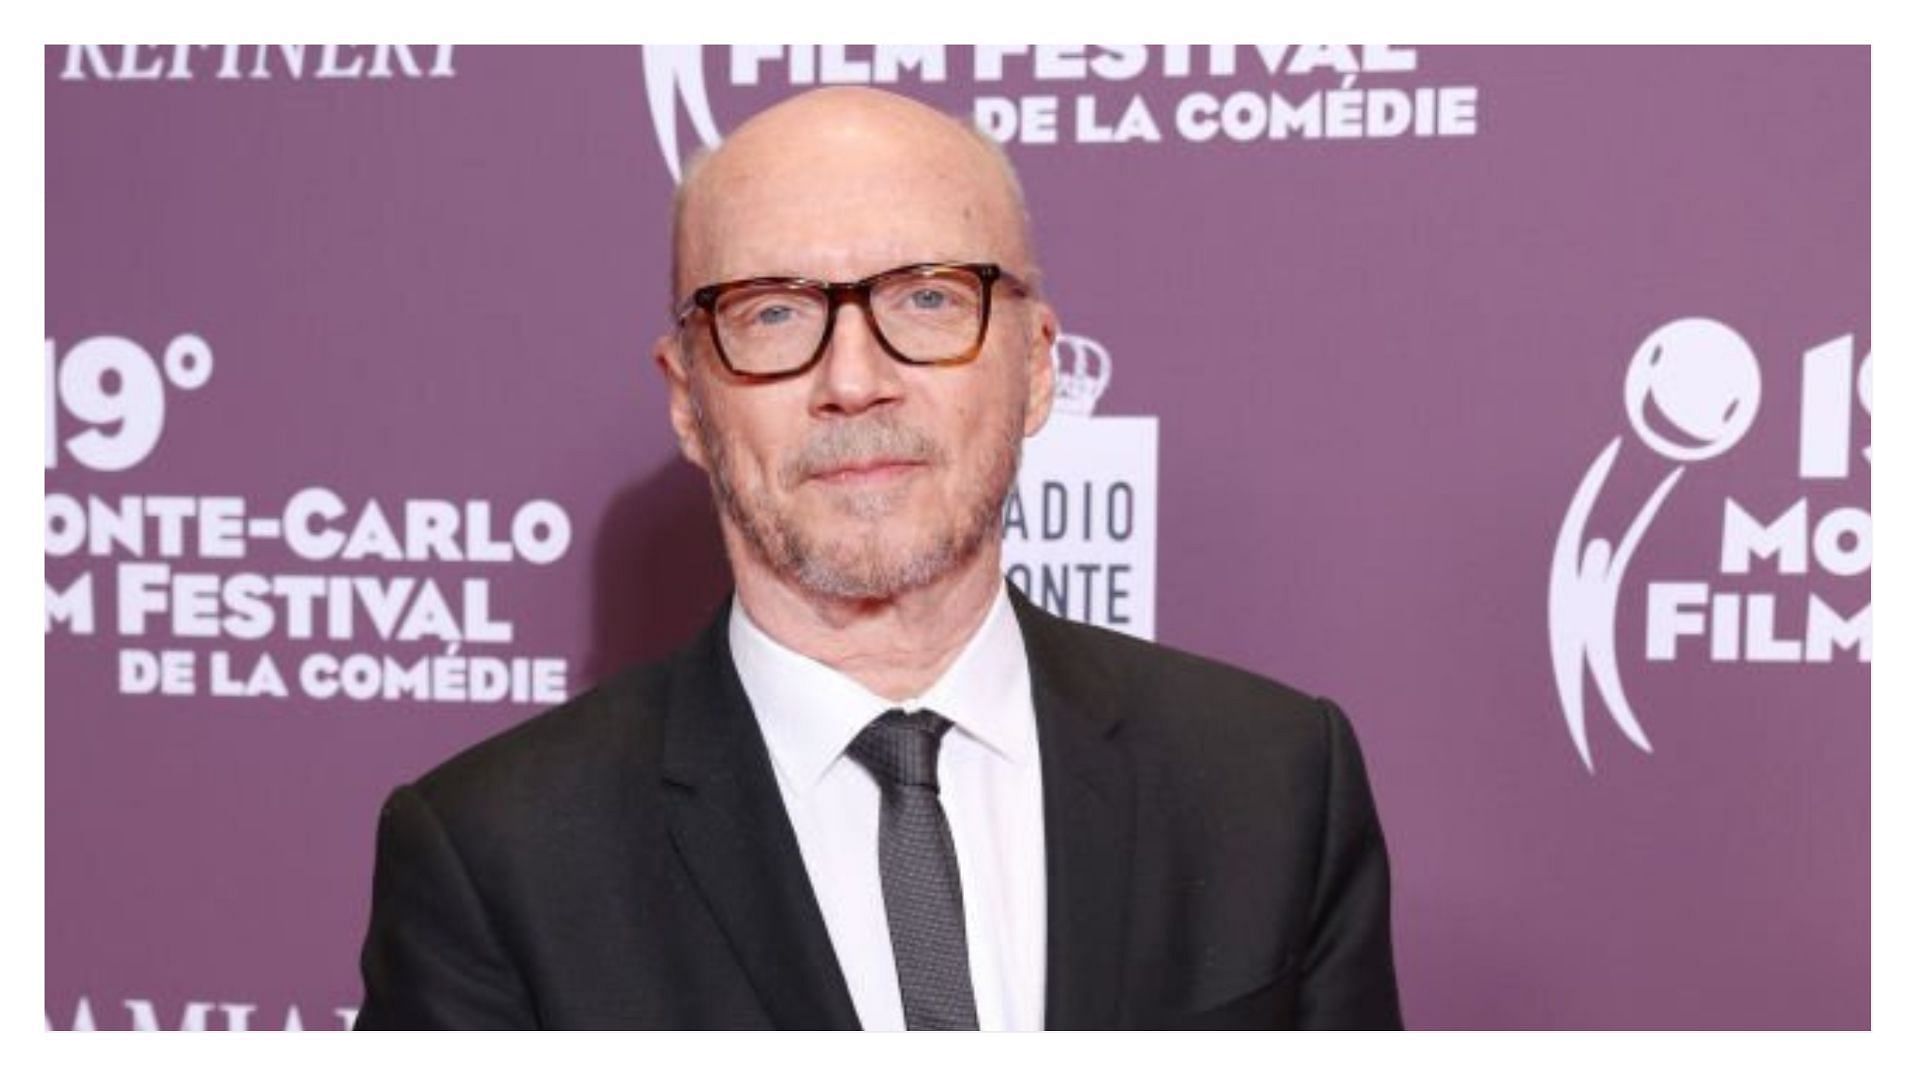 Paul Haggis was recently arrested in Italy on assault allegations (Image via Daniele Venturelli/Getty Images)